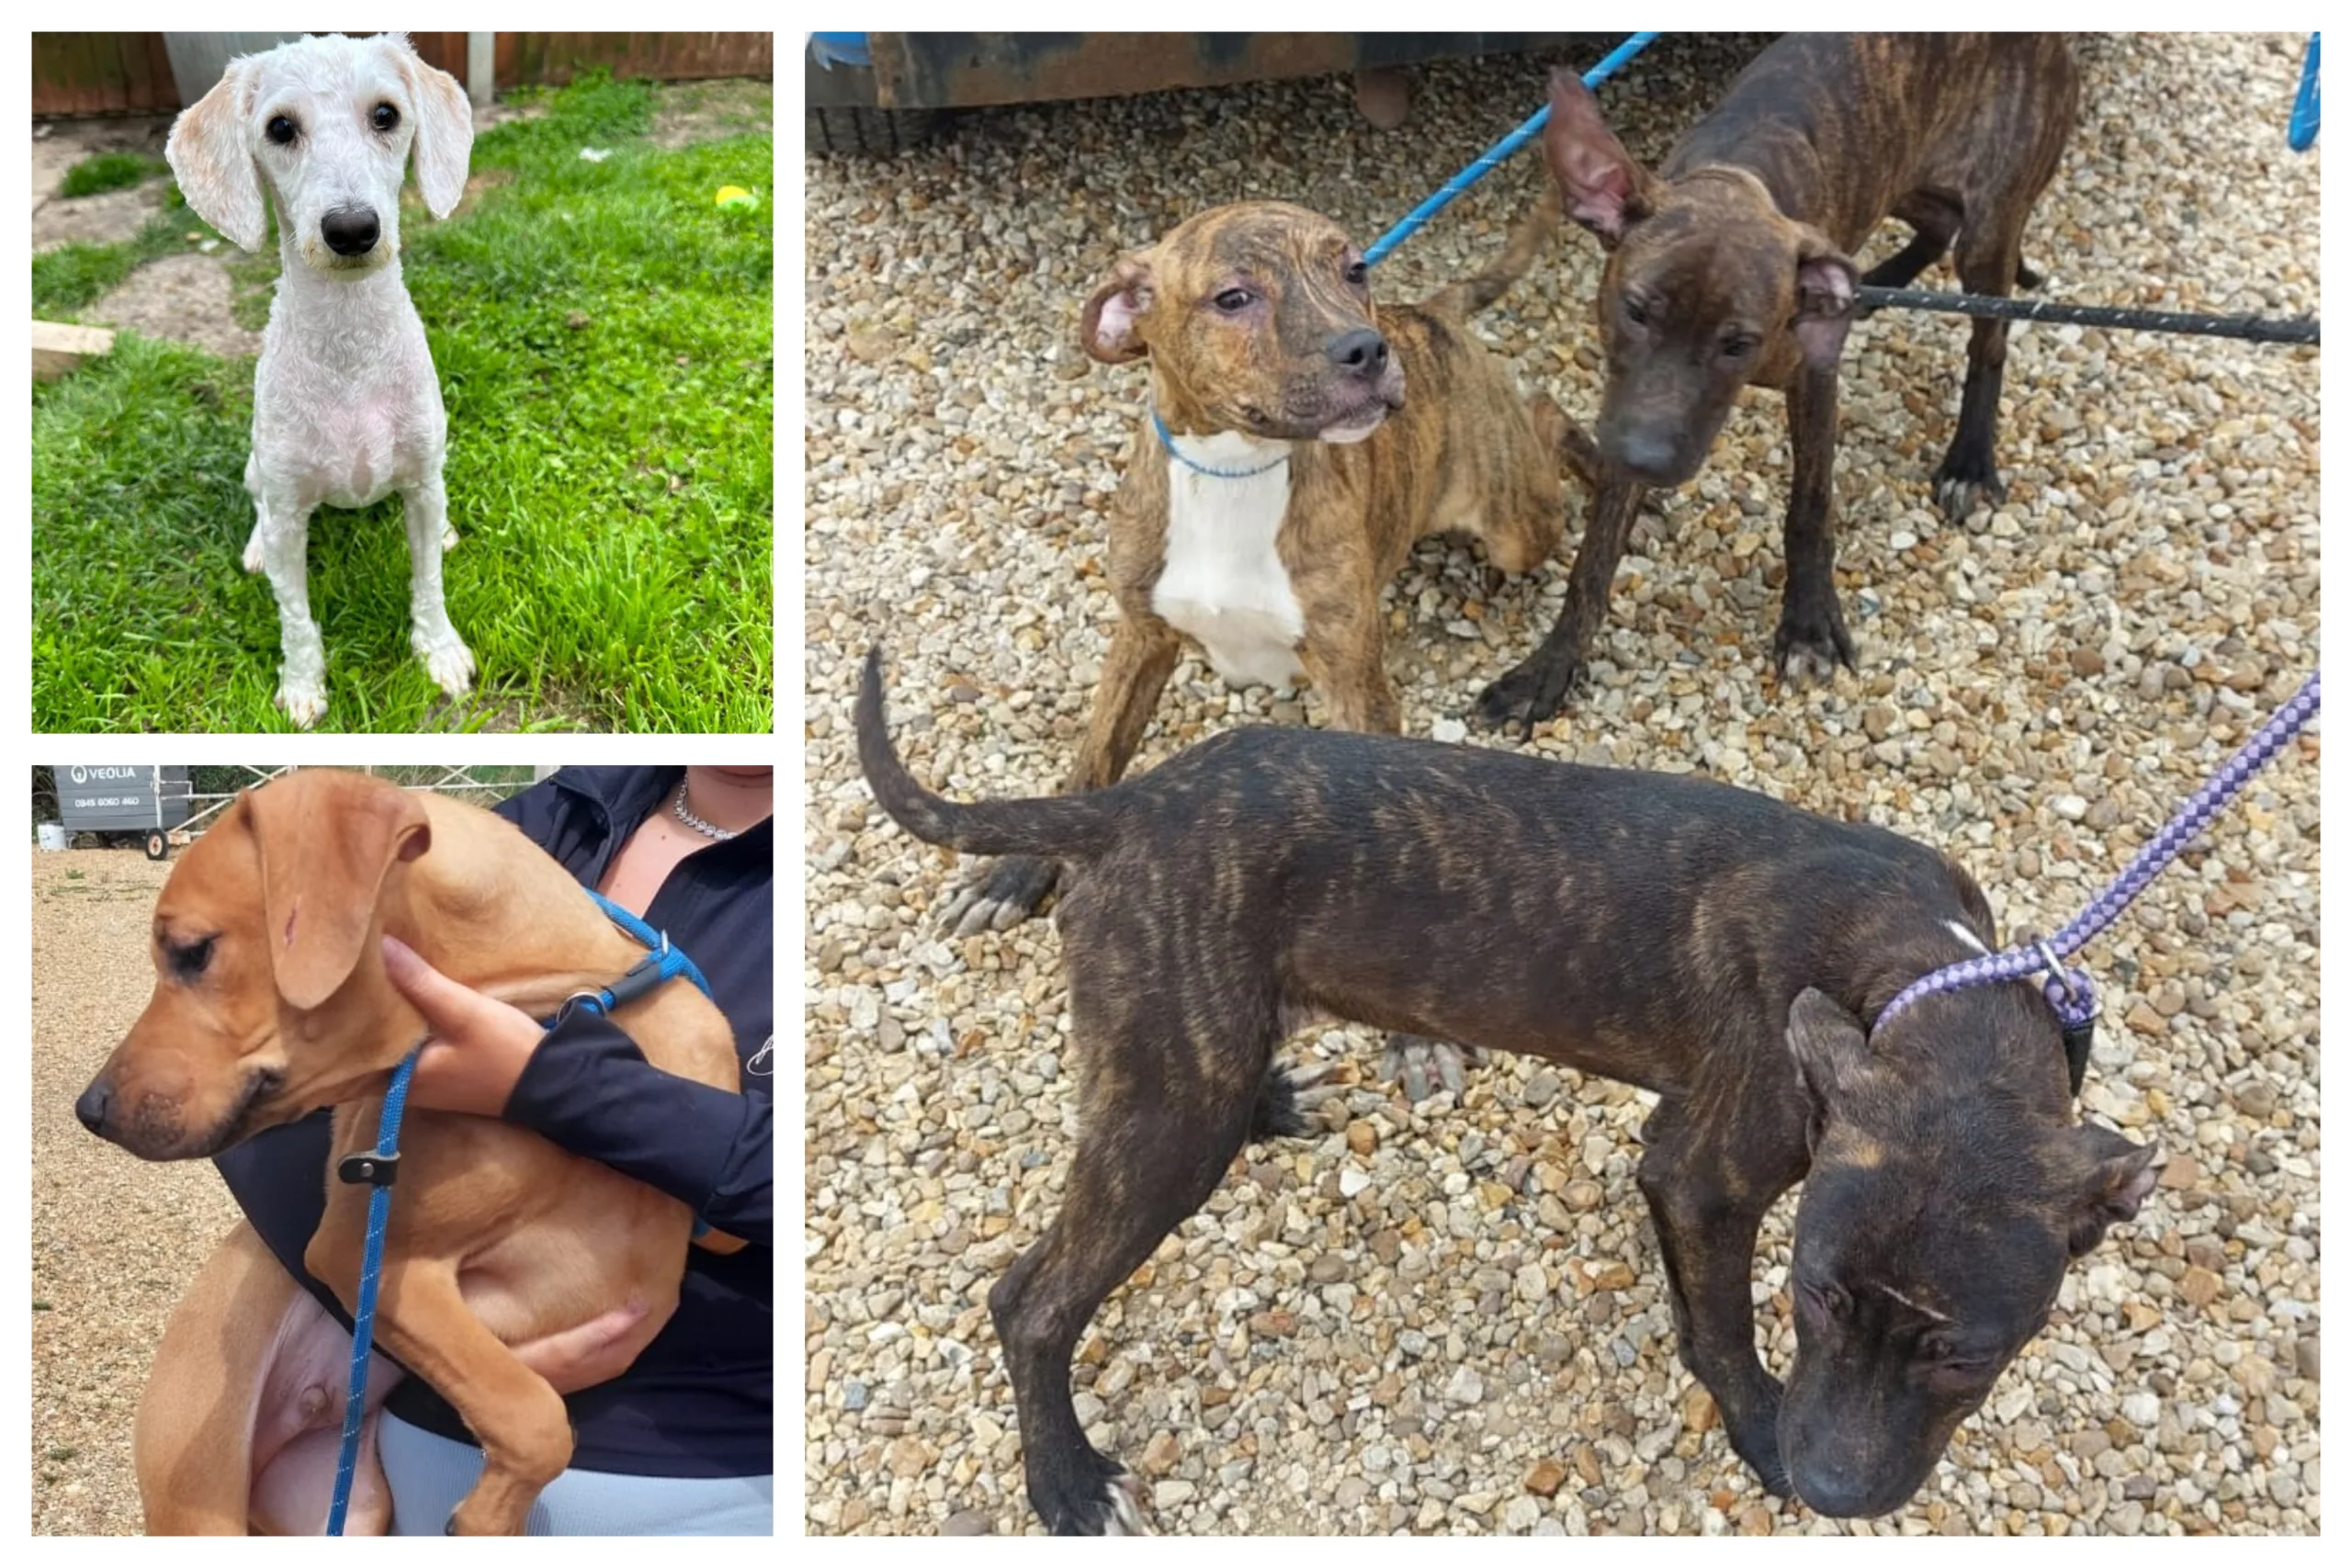 Fenland District Council has released photos of some of the dogs abandoned in recent months. They believe breeders, unable to sell puppies, are to blame.